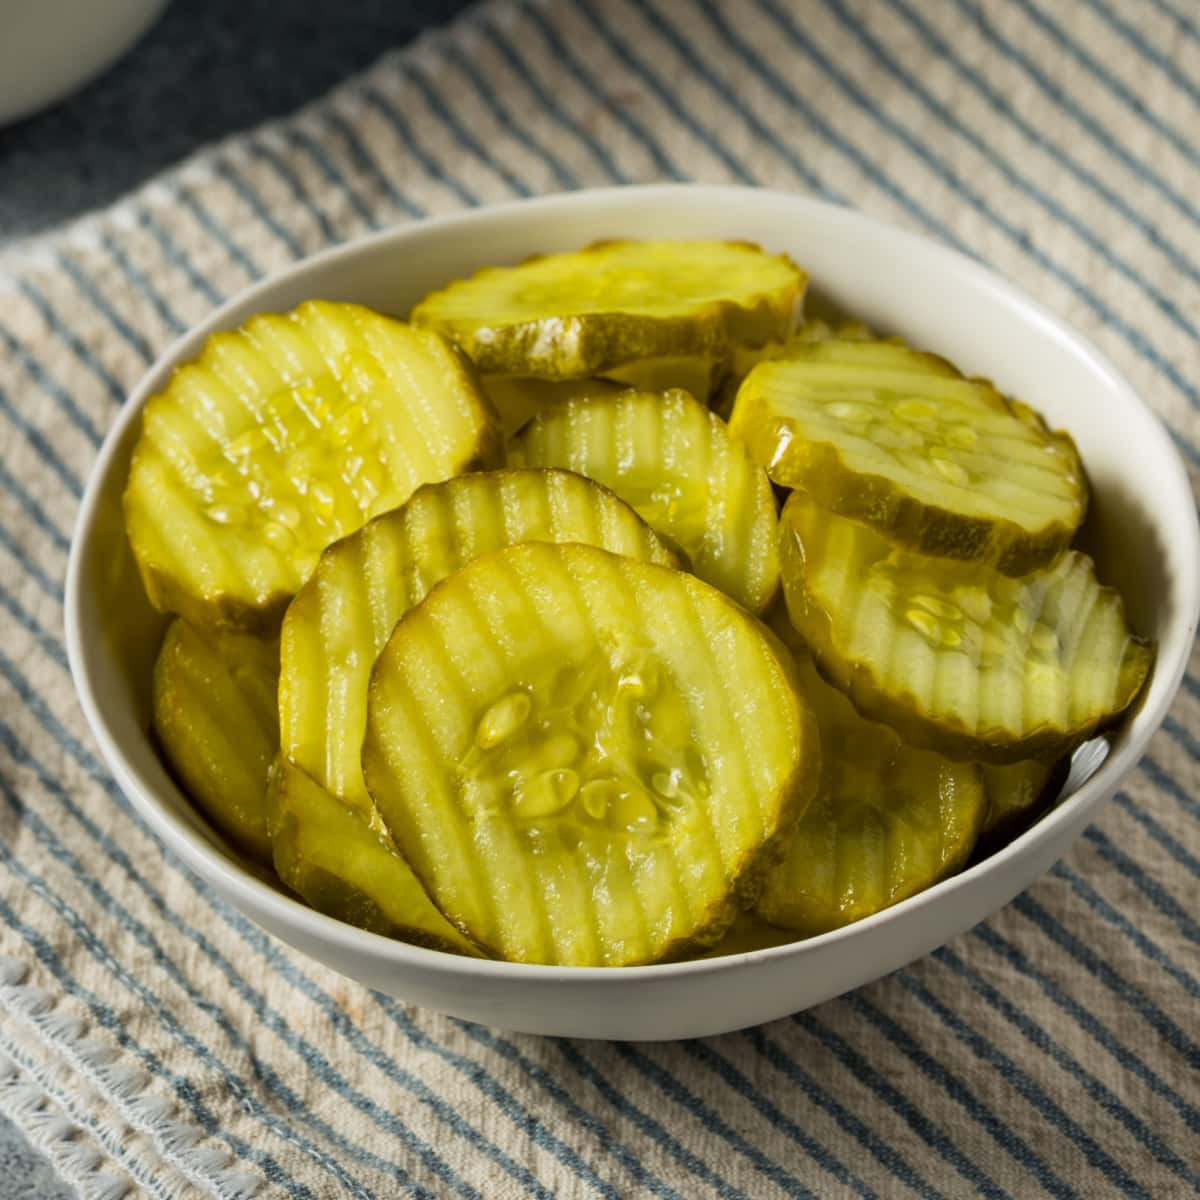 Dill Pickle Slices in a White Bowl